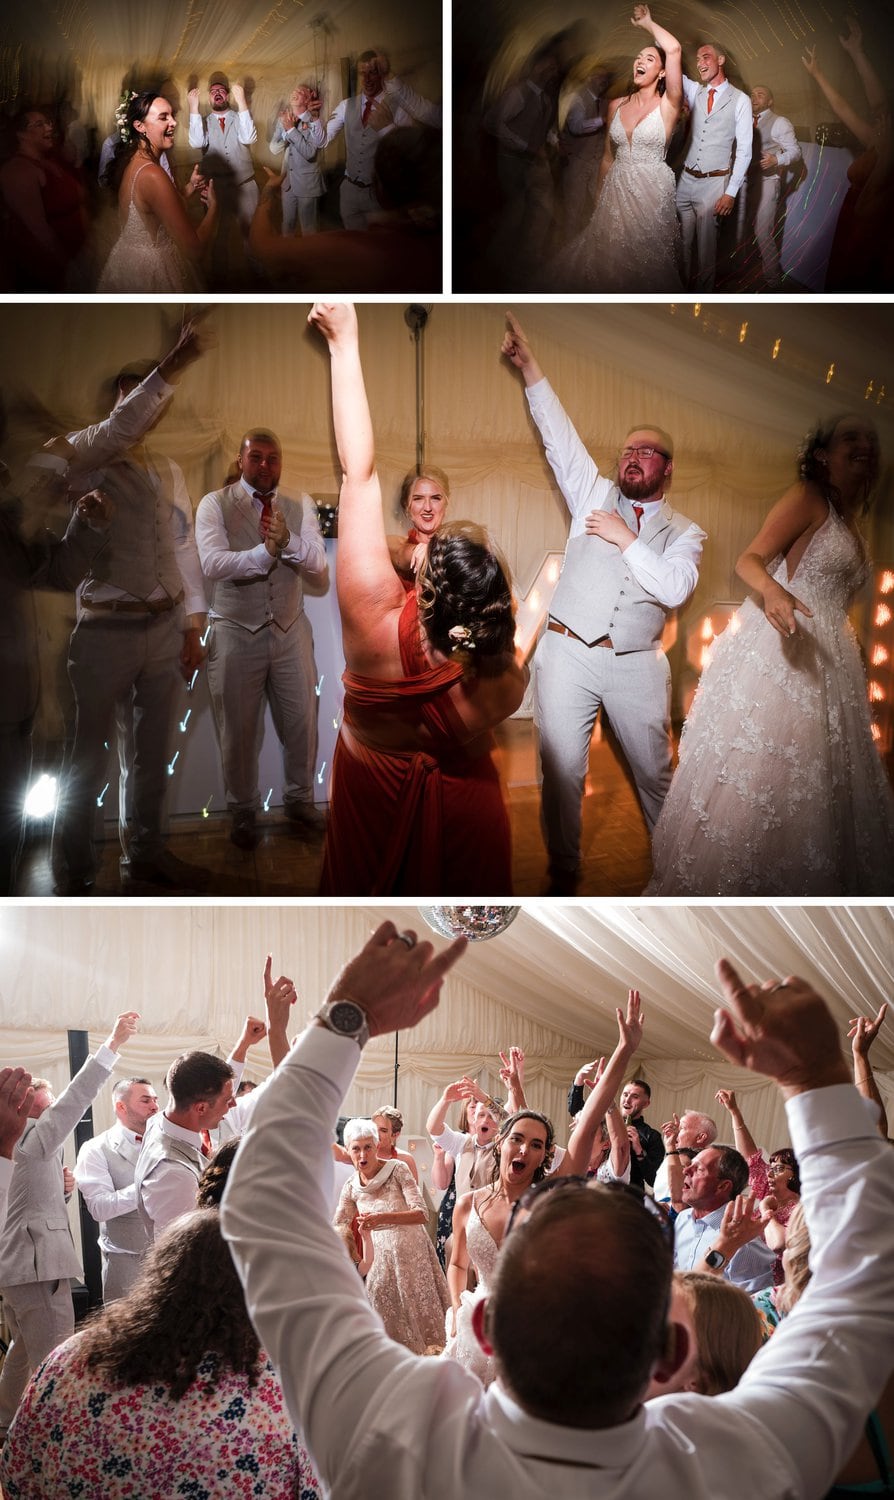 Late night dance floor action at Milborne St Andrew Rugby Club wedding reception